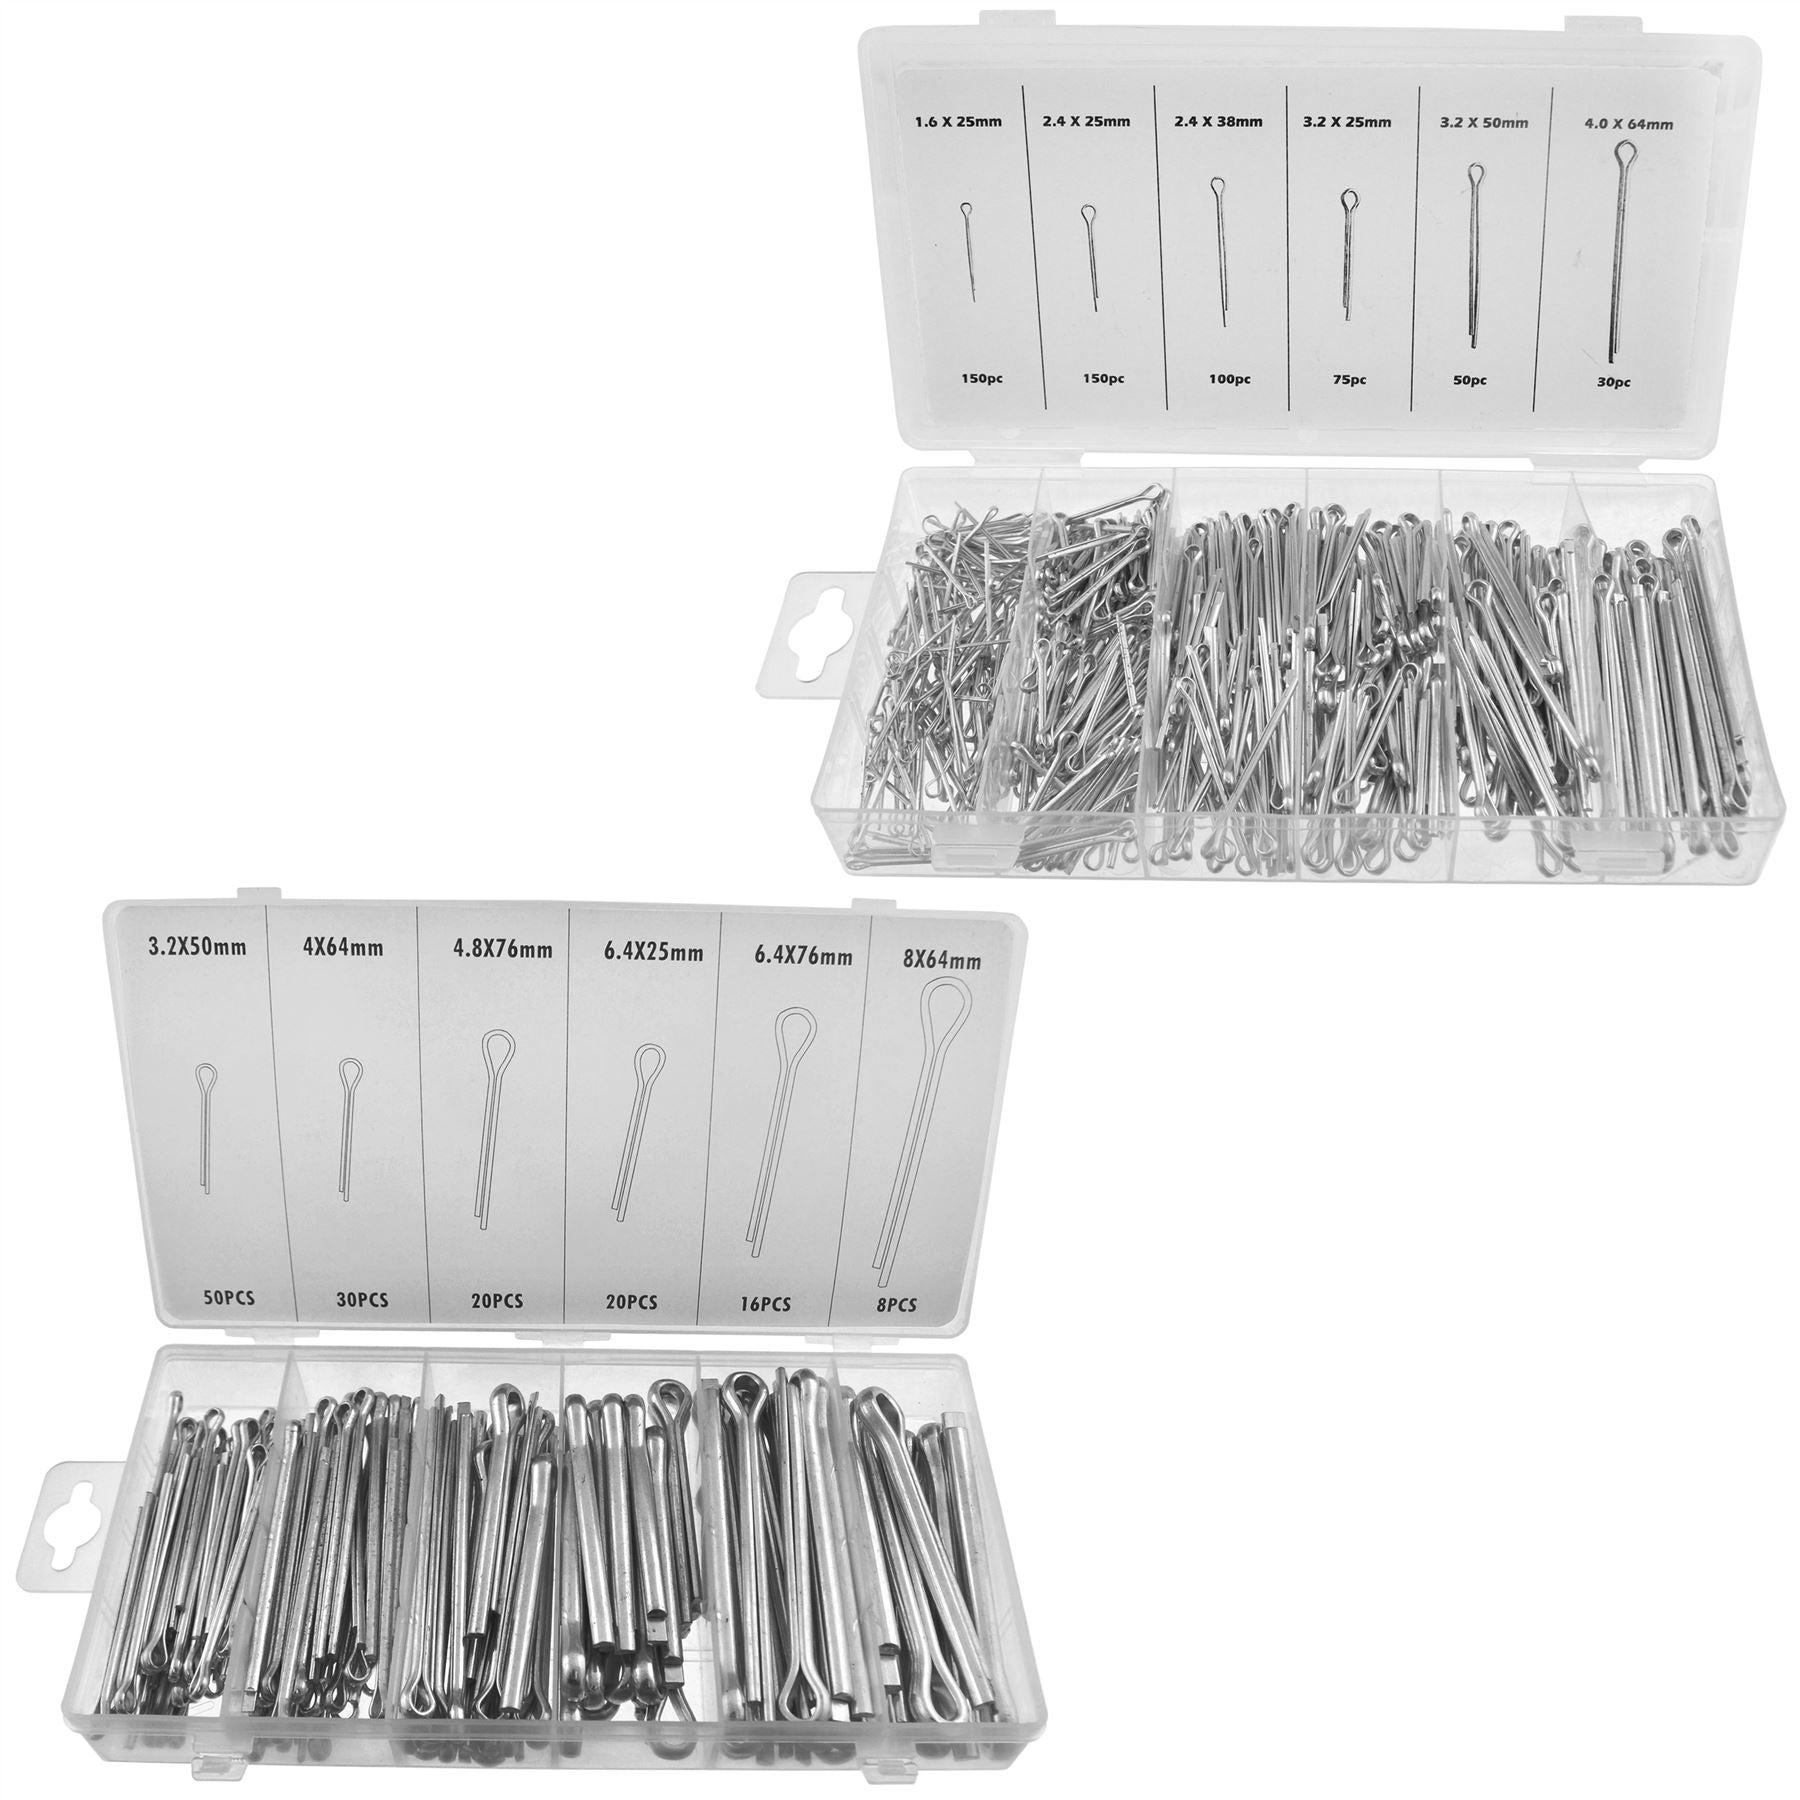 Cotter Pin Split Pin Fastener Assortment Small to Large Sizes 699pc AST13_AST18